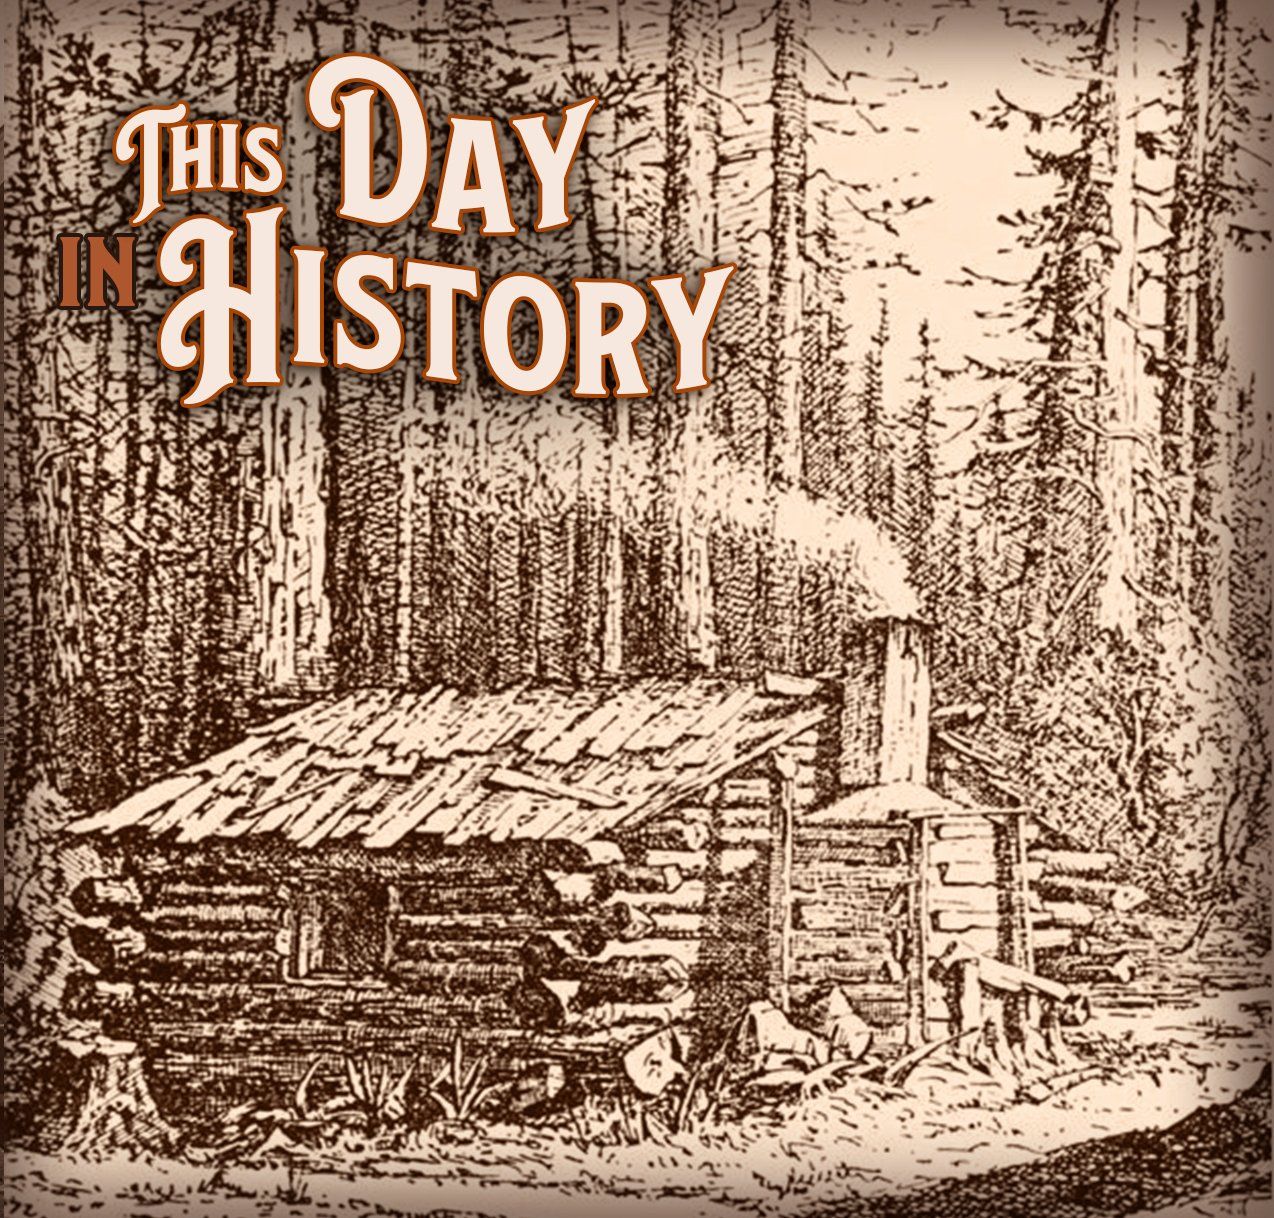 The first home in Portland was a log cabin similar to the one pictured here.